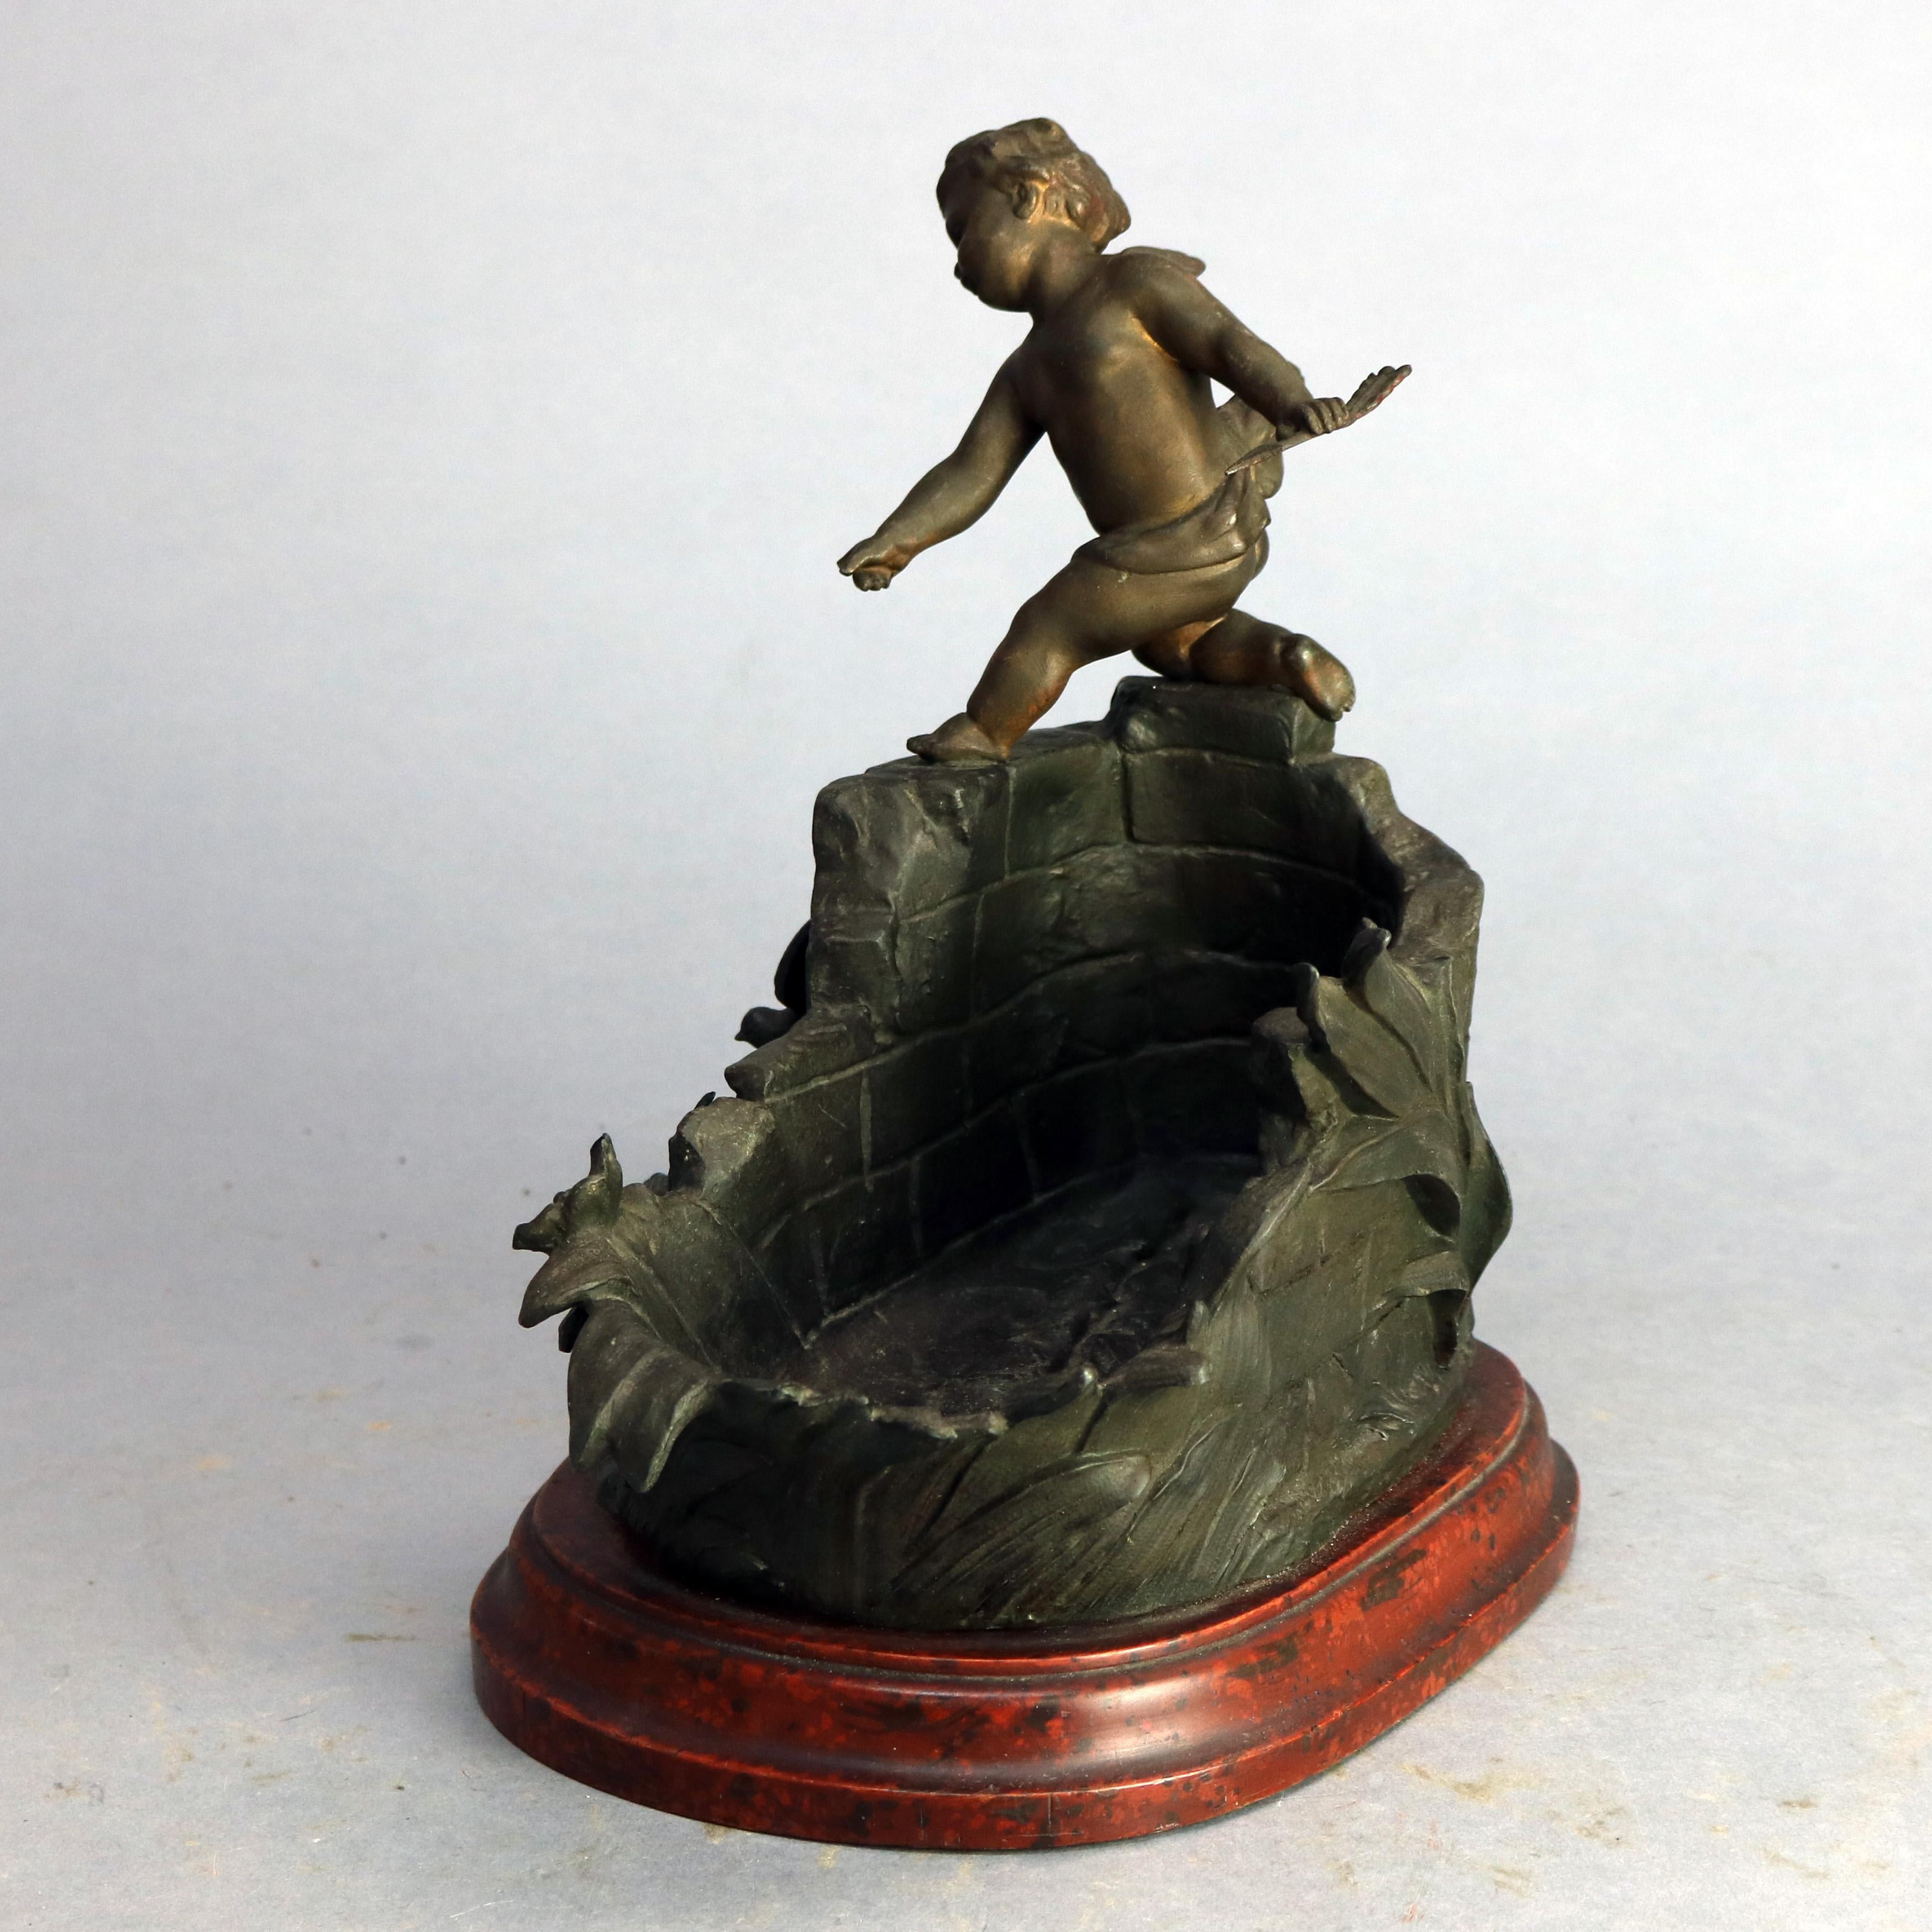 Antique French bronzed cast metal sculpture of cherub over bowl in the form of architectural ruins with foliate elements and bird seated on stepped faux marble painted wood base, title plate reads 